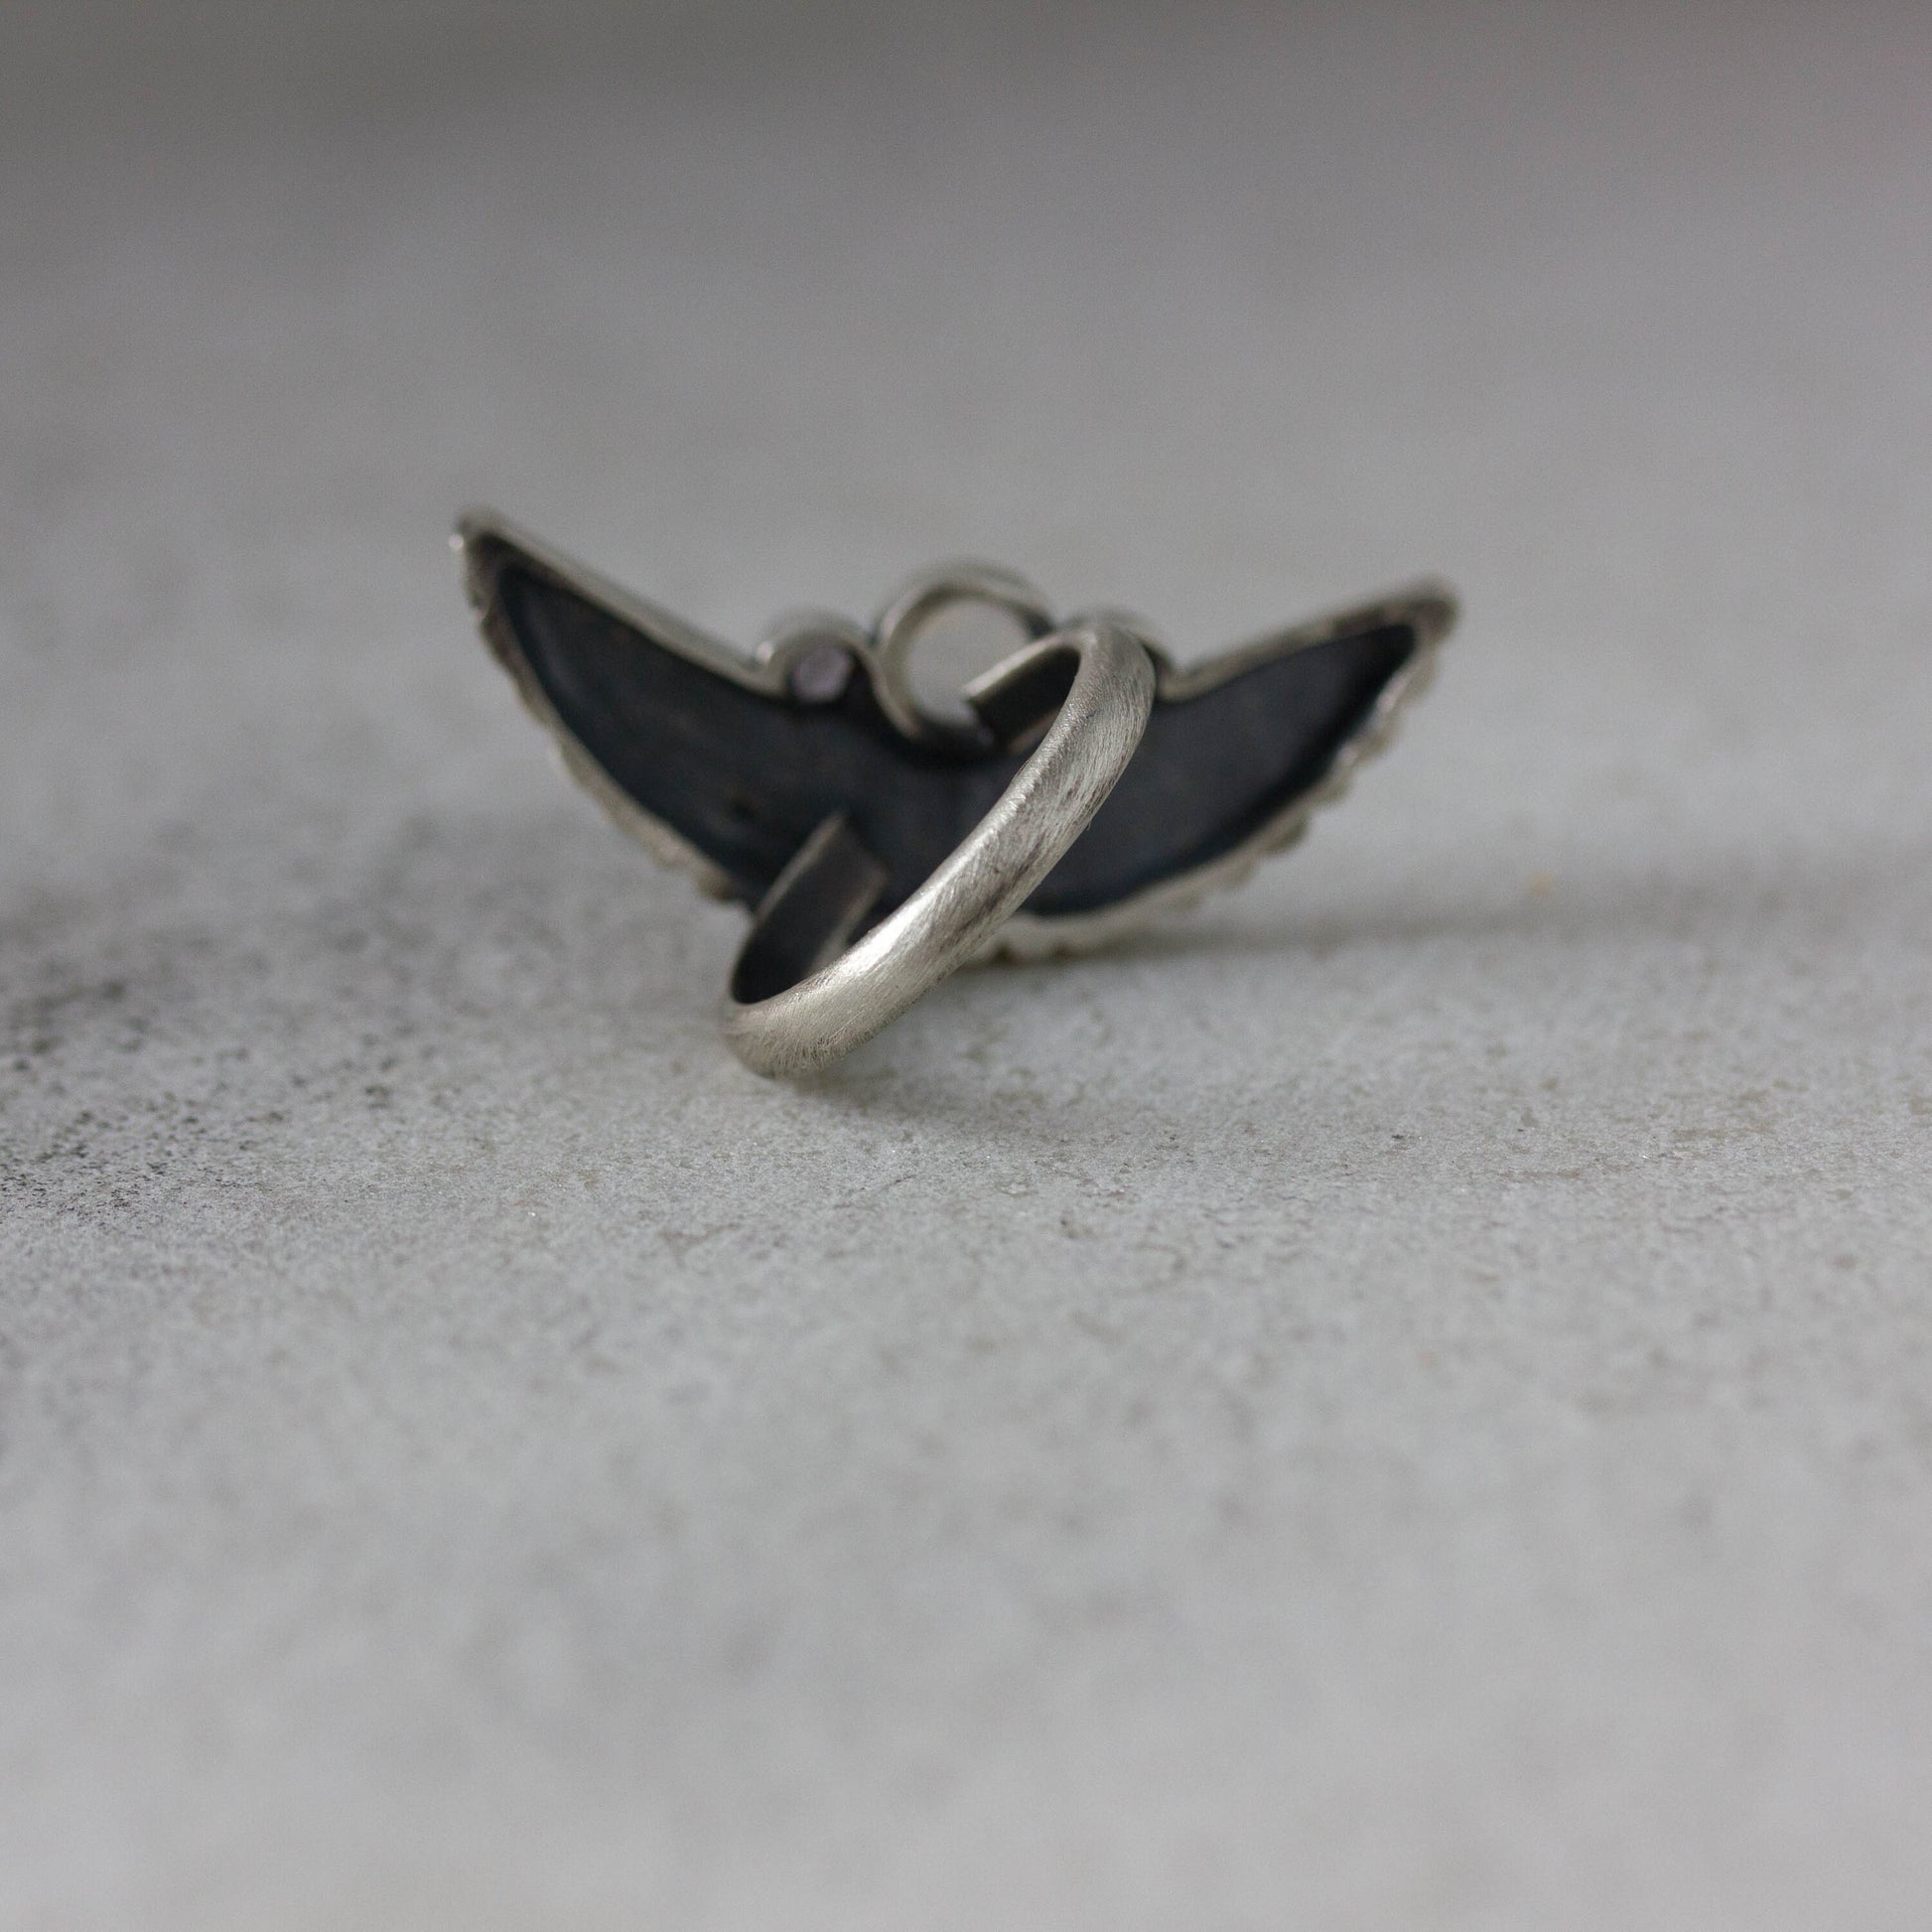 Handmade Silver Wing Statement Ring with a black wing, by Cassin Jewelry.